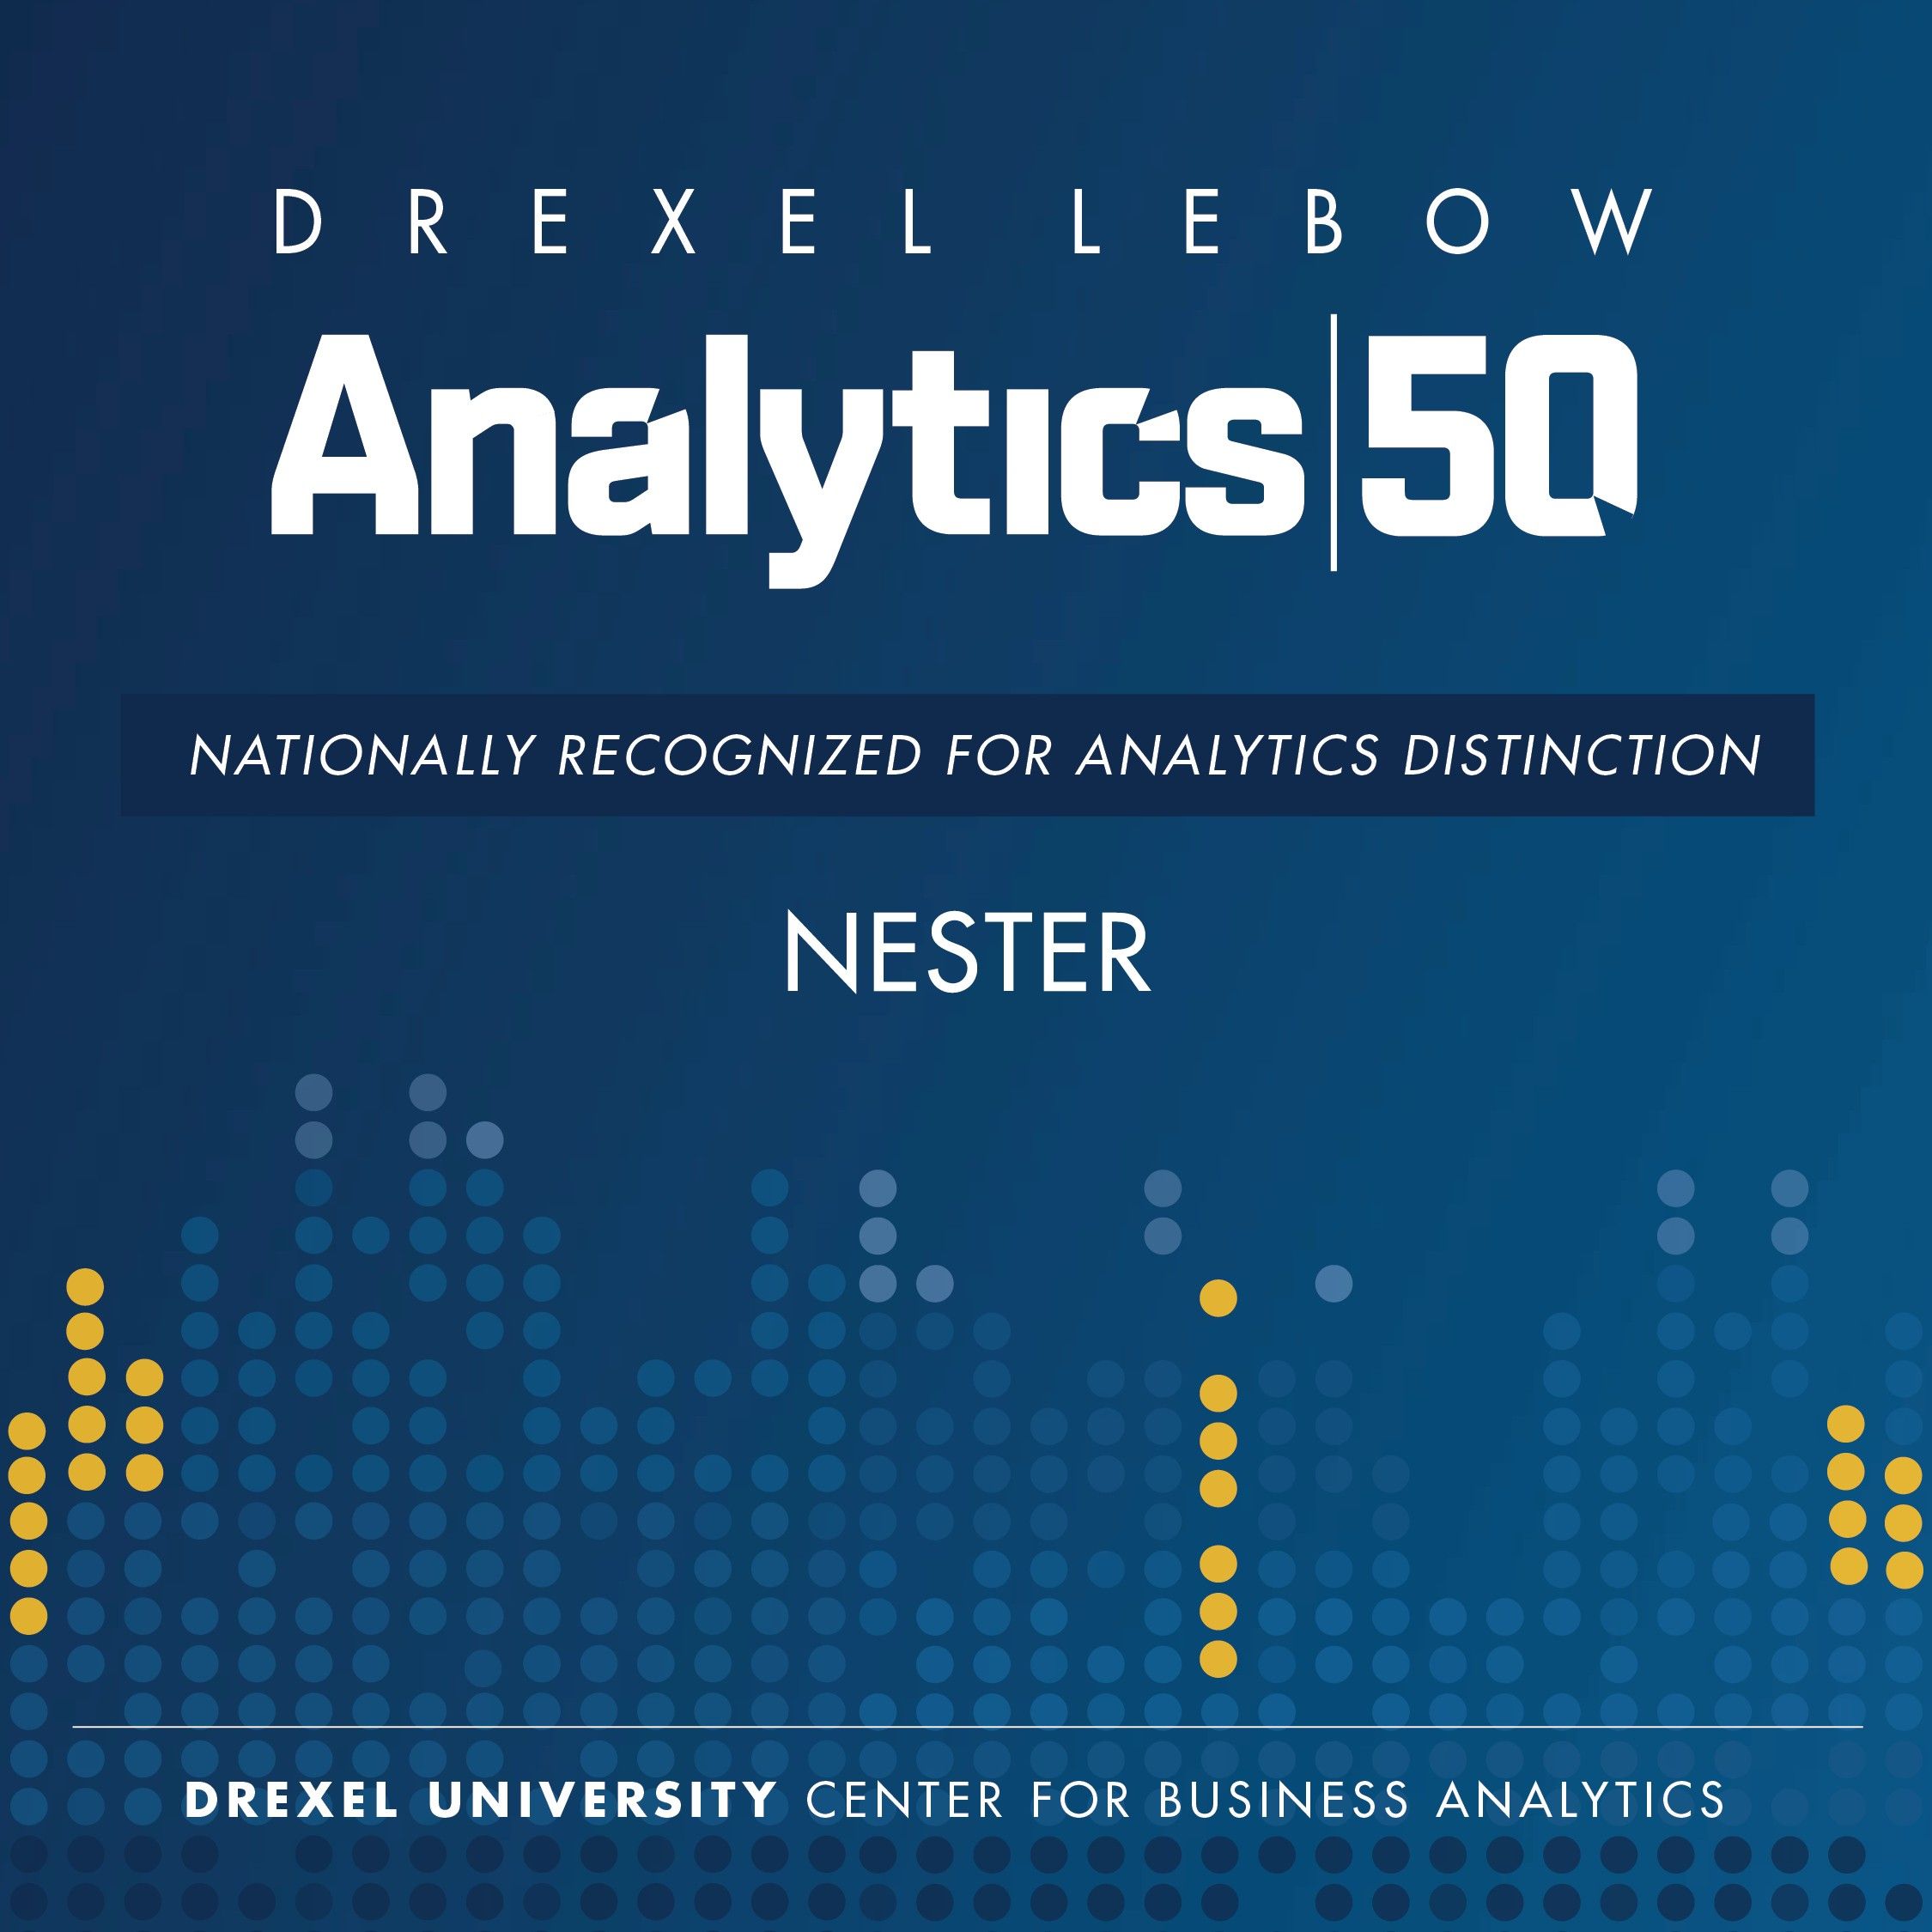 Efficiency, Integrity and Transparency Set Apart the 2023 Drexel LeBow Analytics 50 Awardees